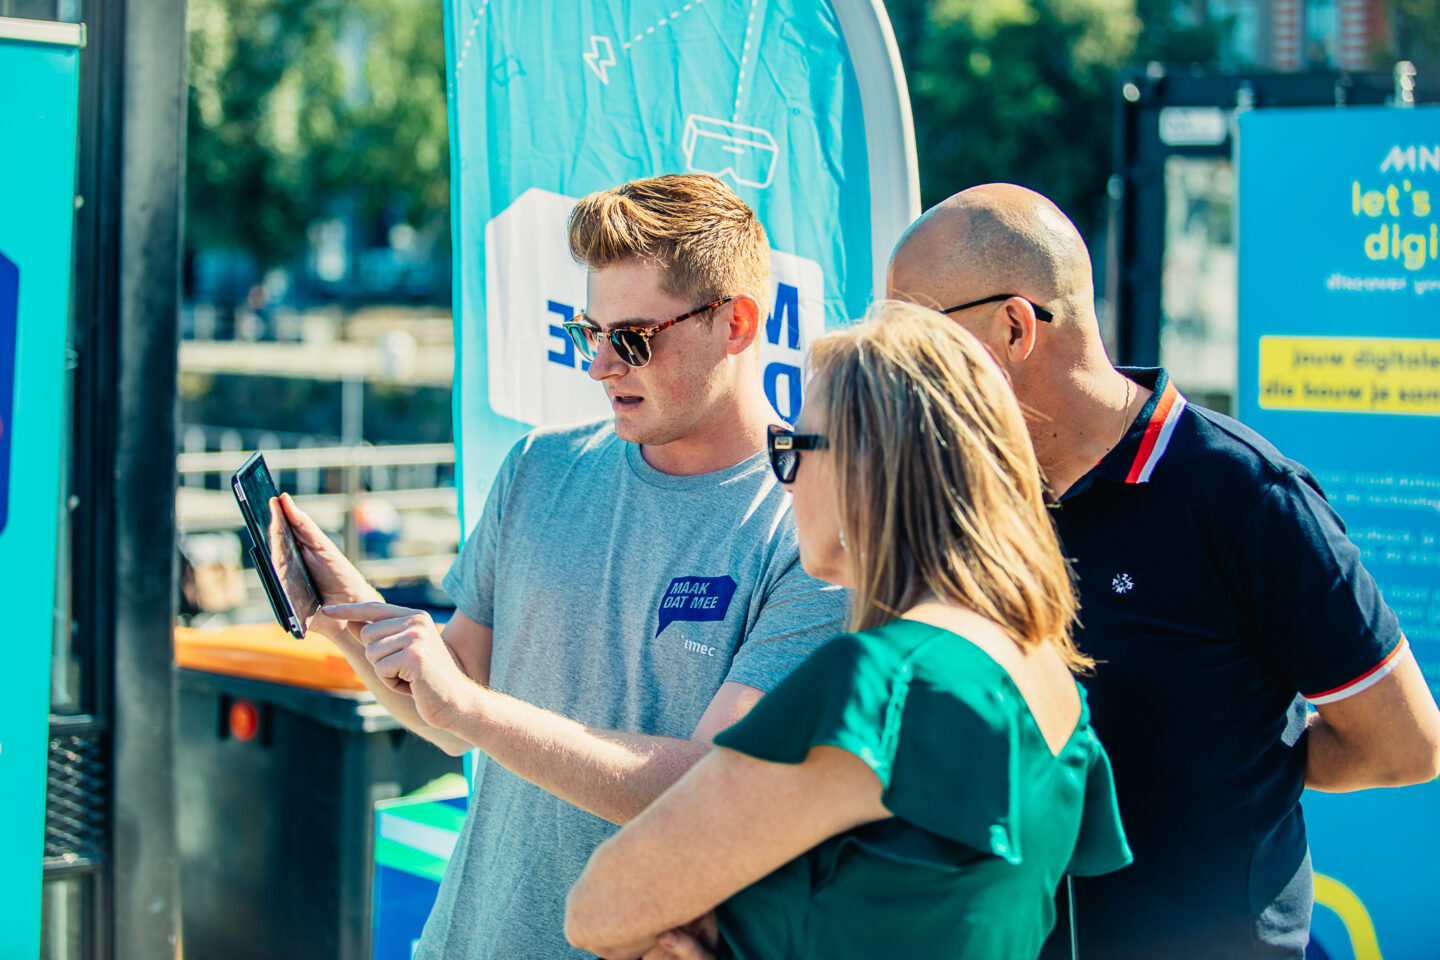 Maak Dat Mee - Augmented reality application for event